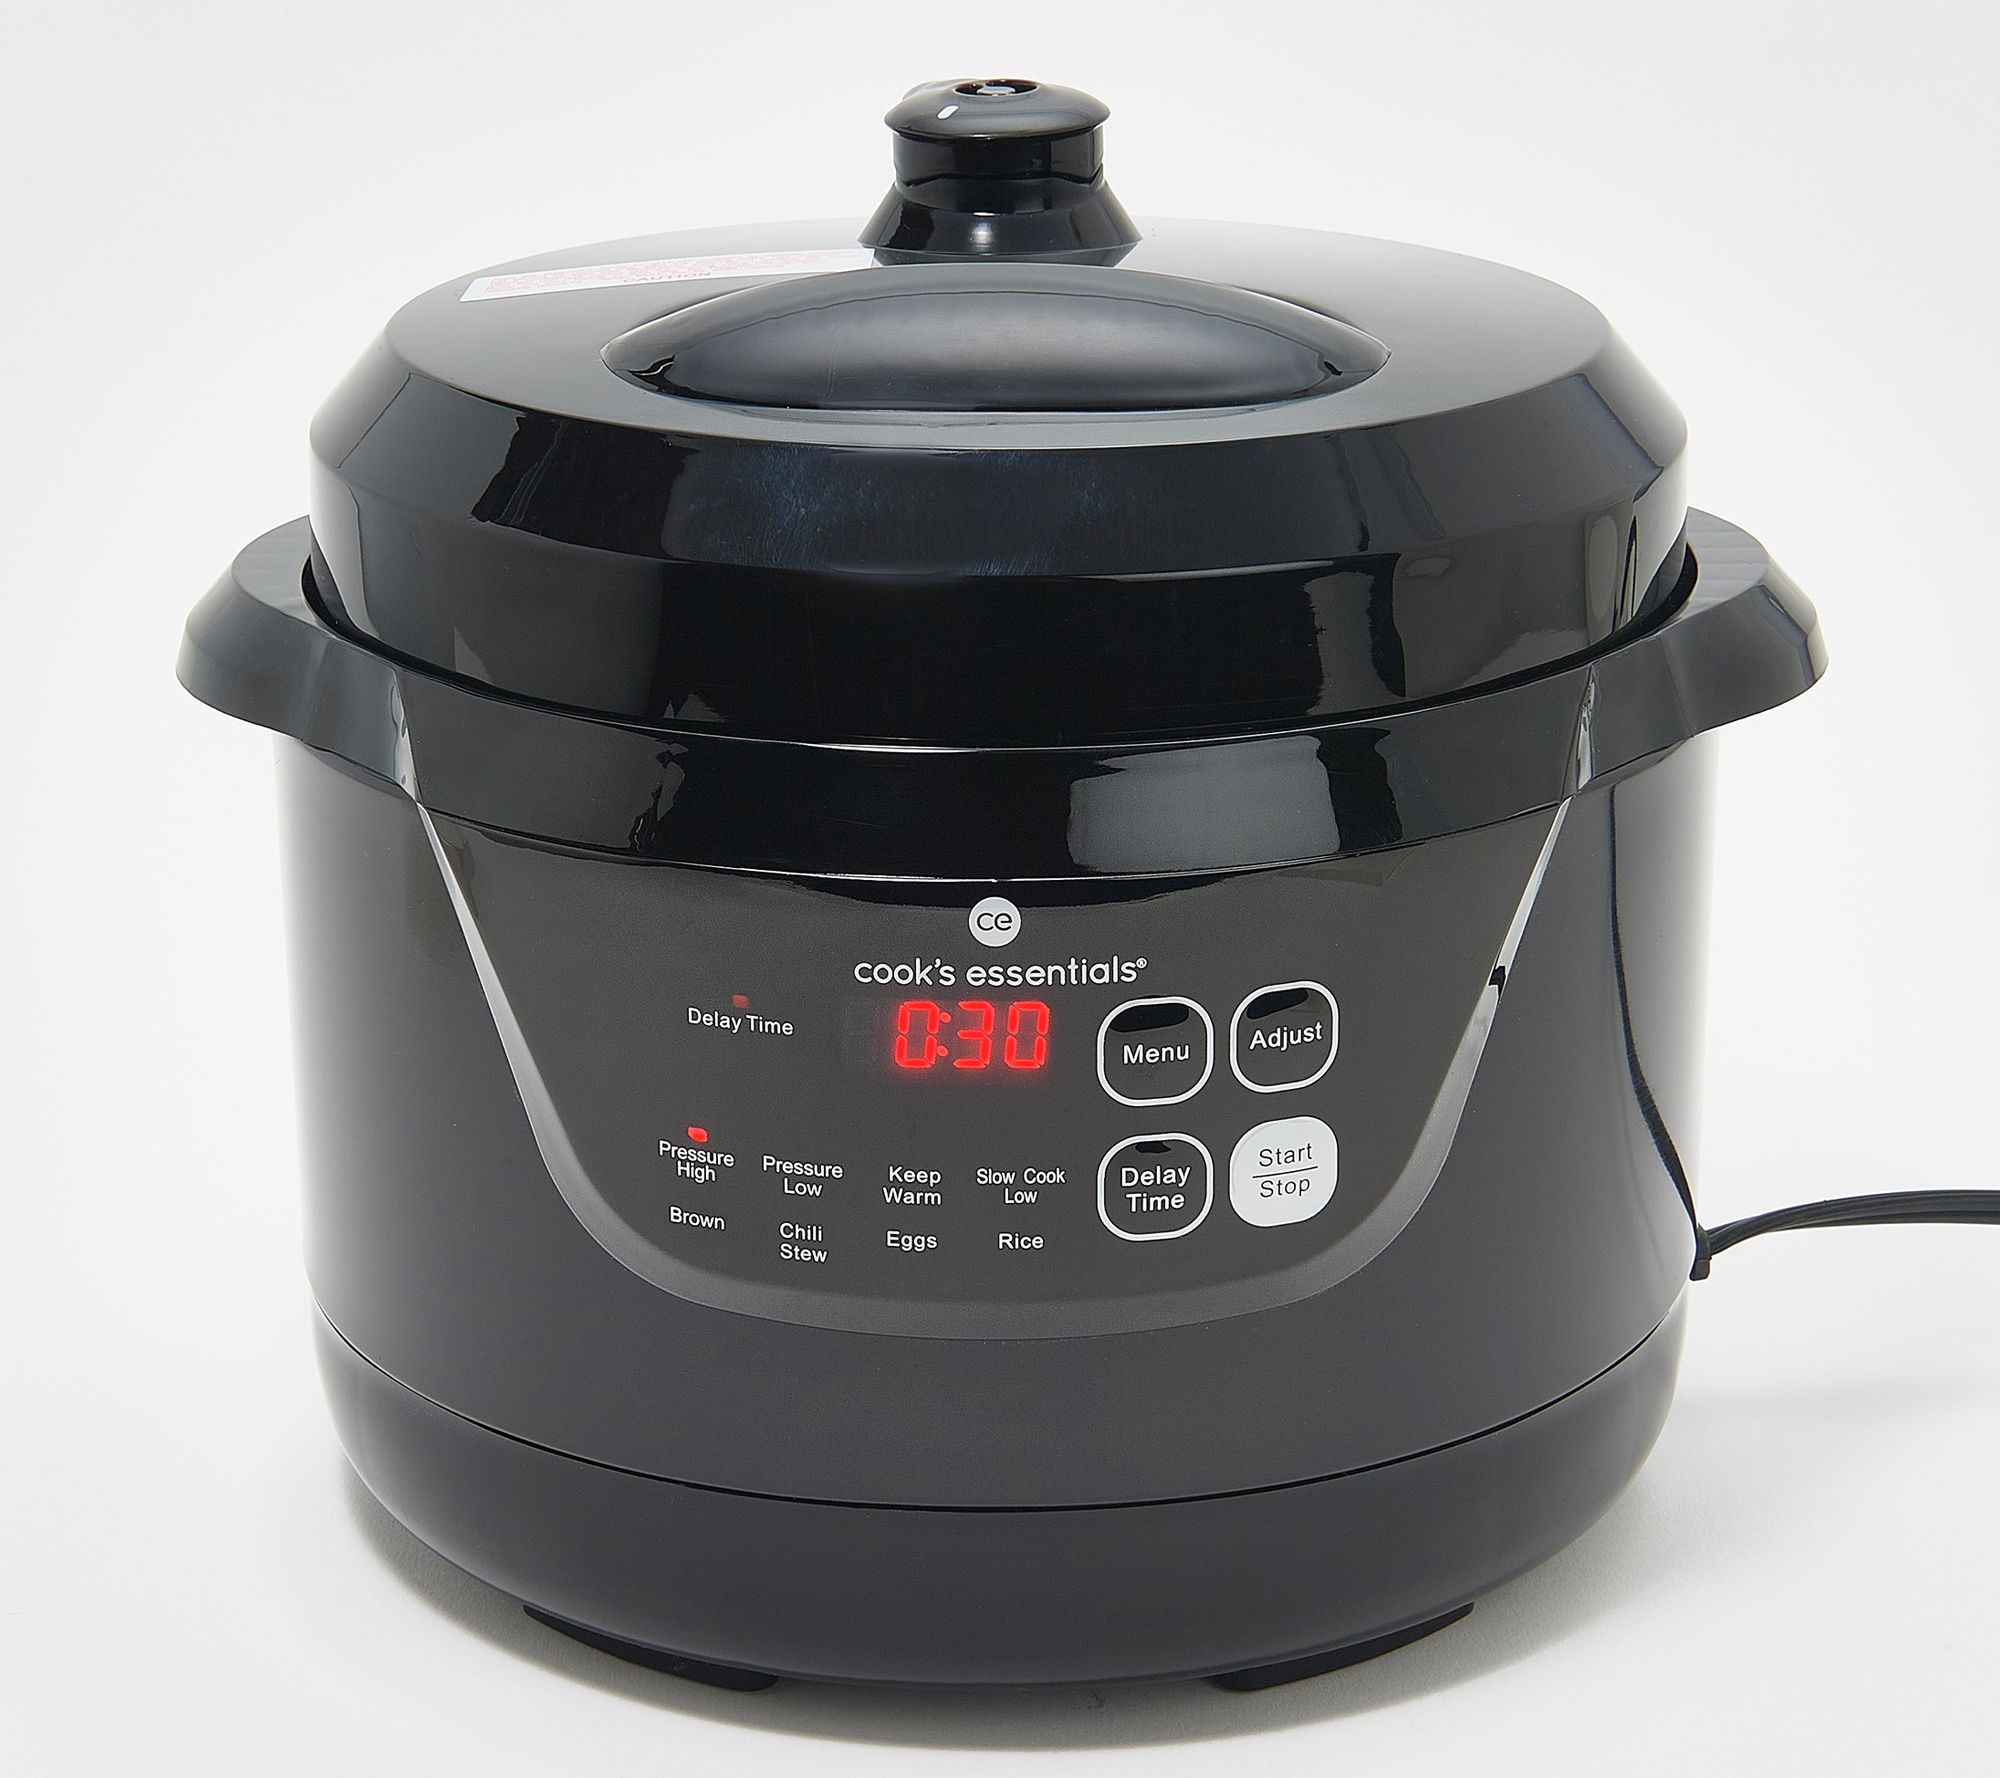 KOOC - Small Slow Cooker - 2 Quart, Red, with Free Liners